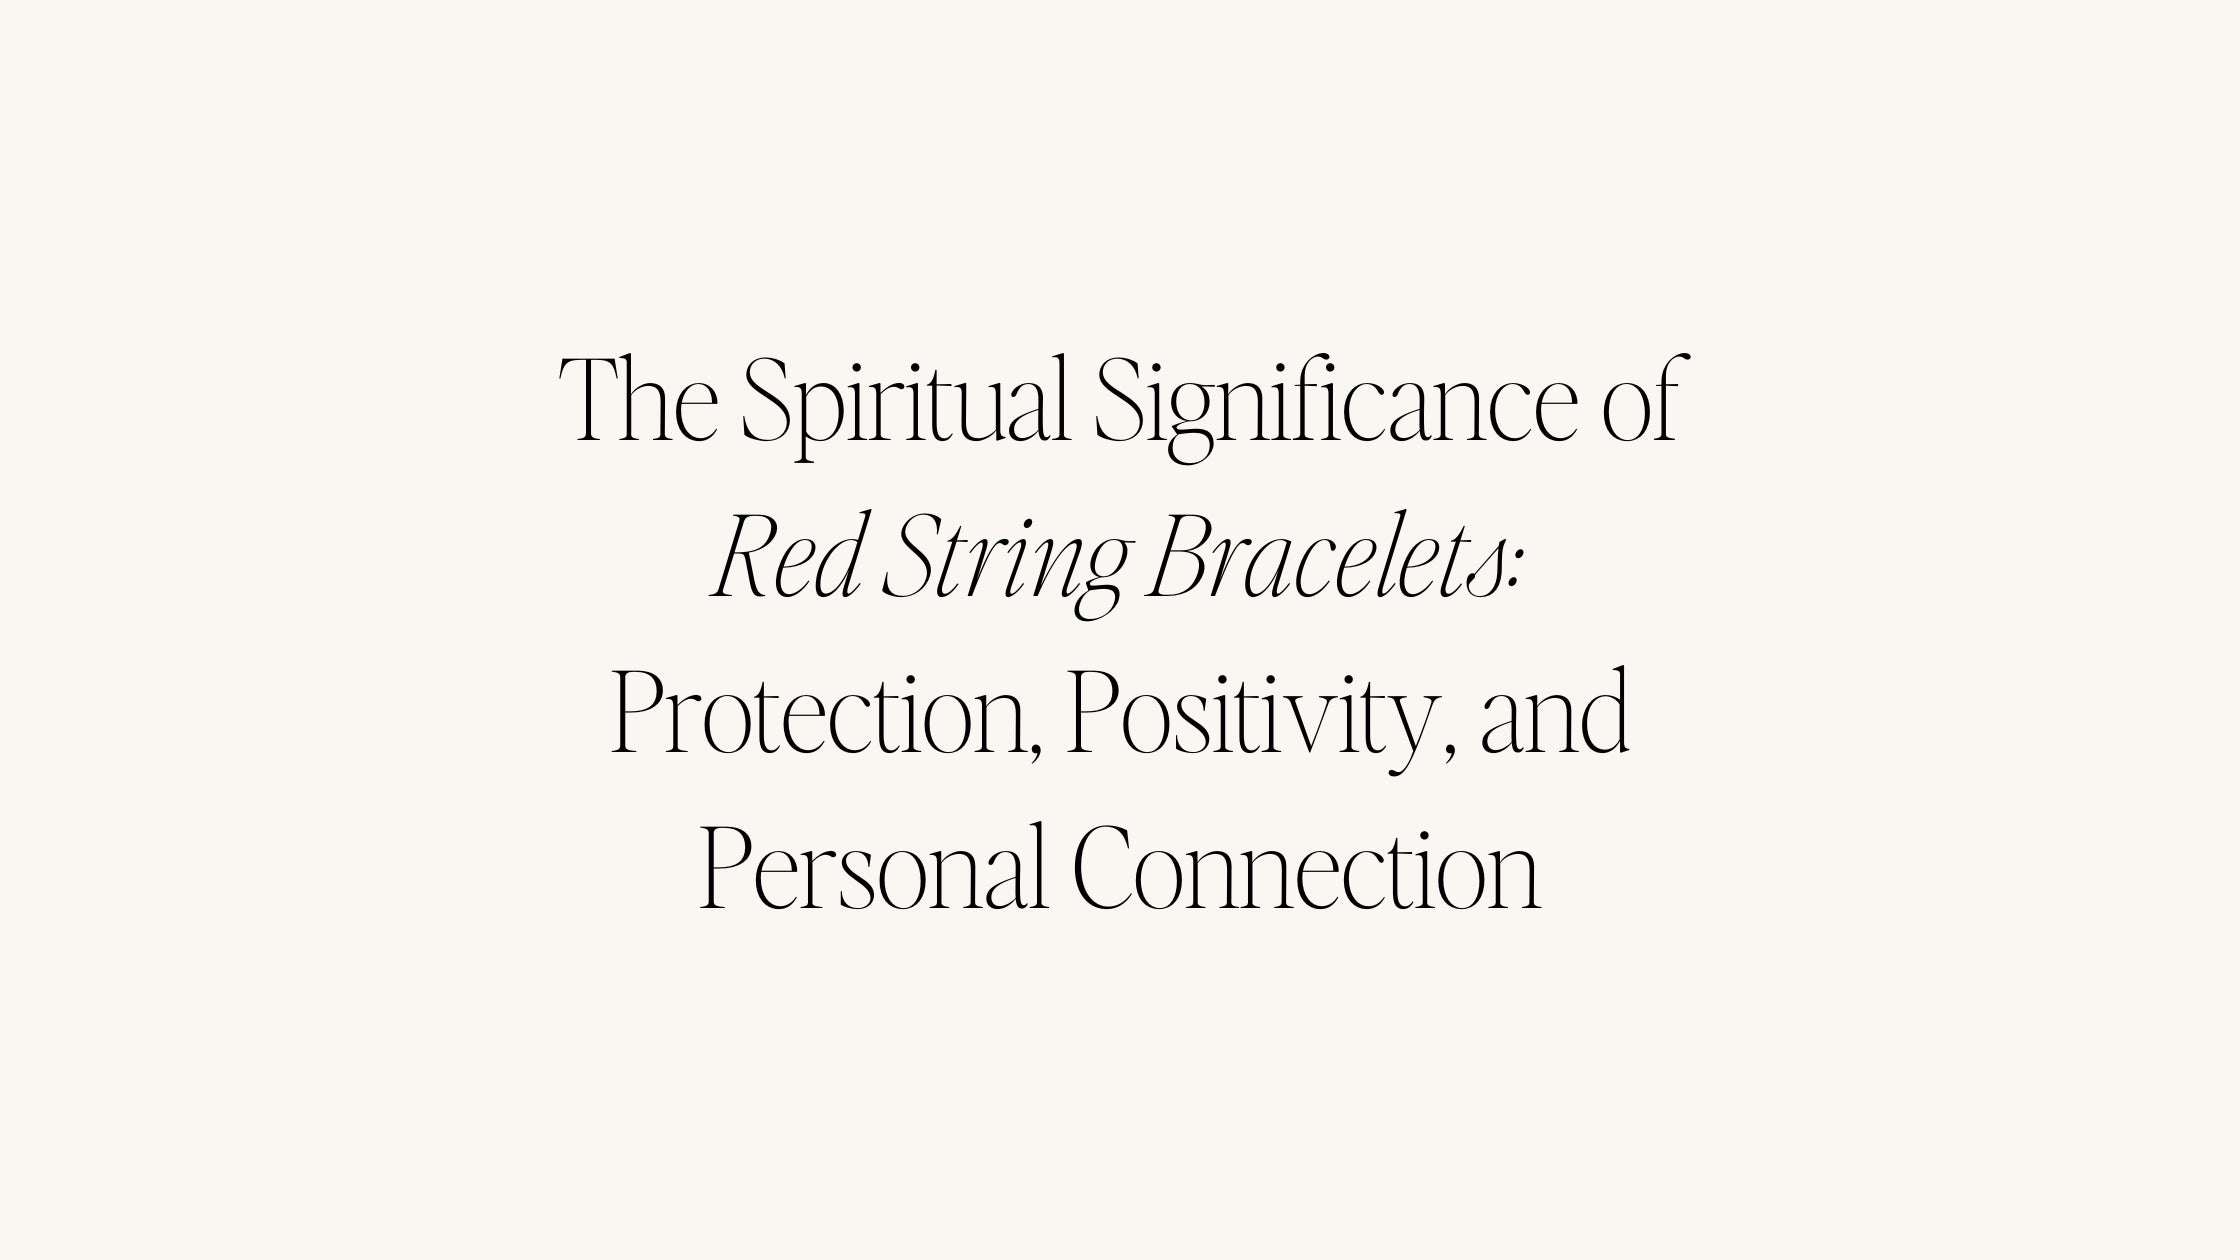 The Spiritual Significance of Red String Bracelets: Protection, Positivity, and Personal Connection